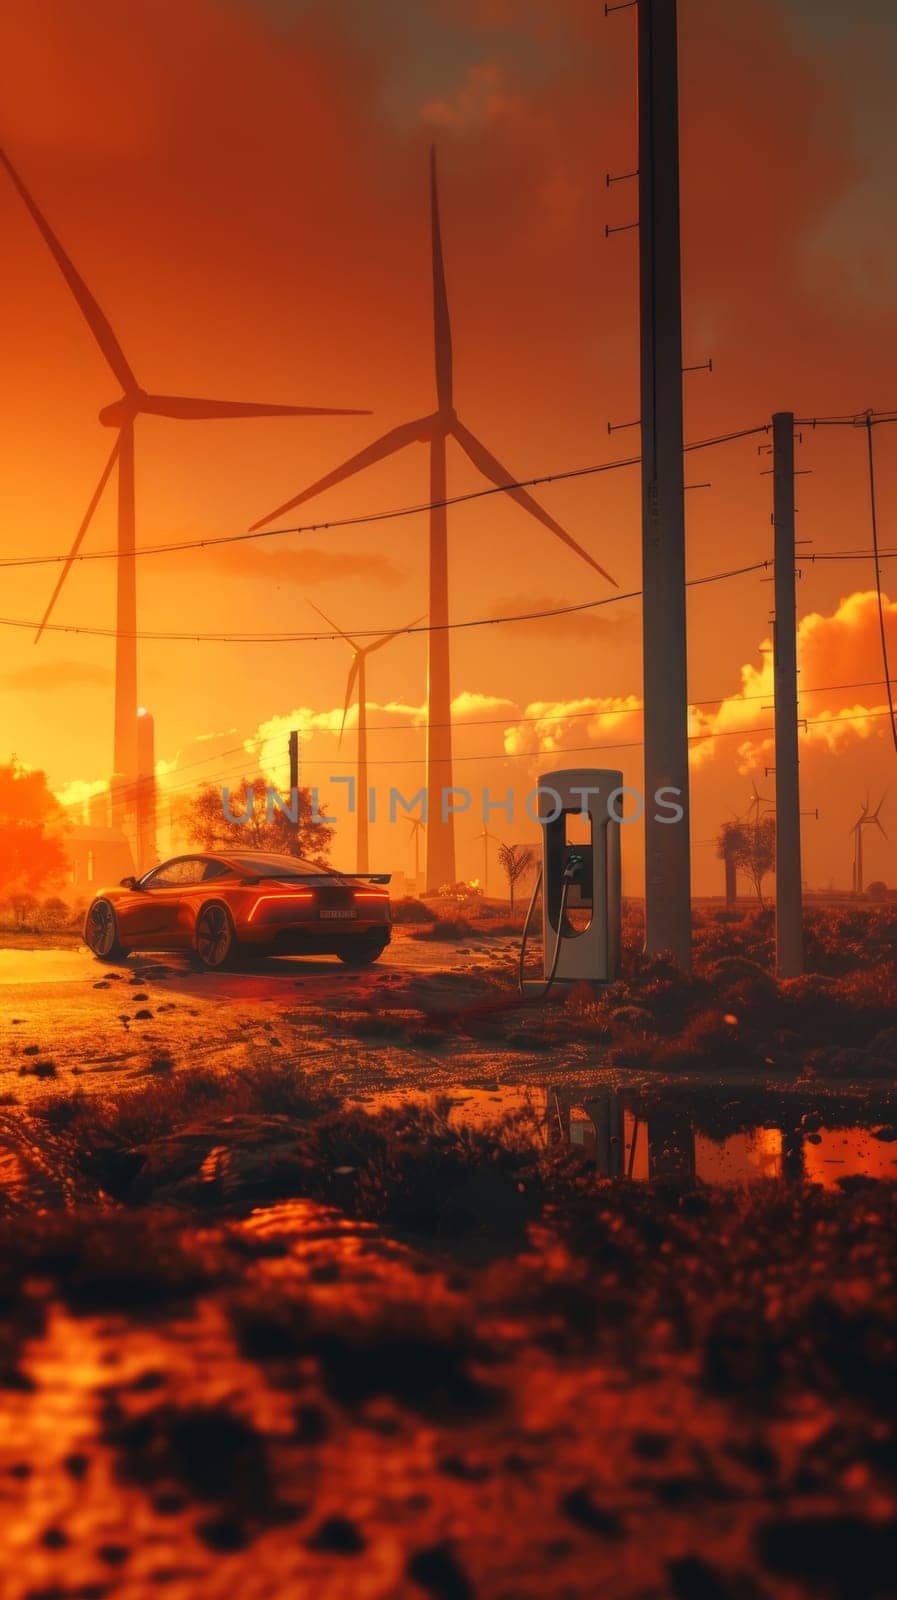 Electric vehicle charging amidst a field of wind turbines during a stunning orange-hued sunset. by sfinks